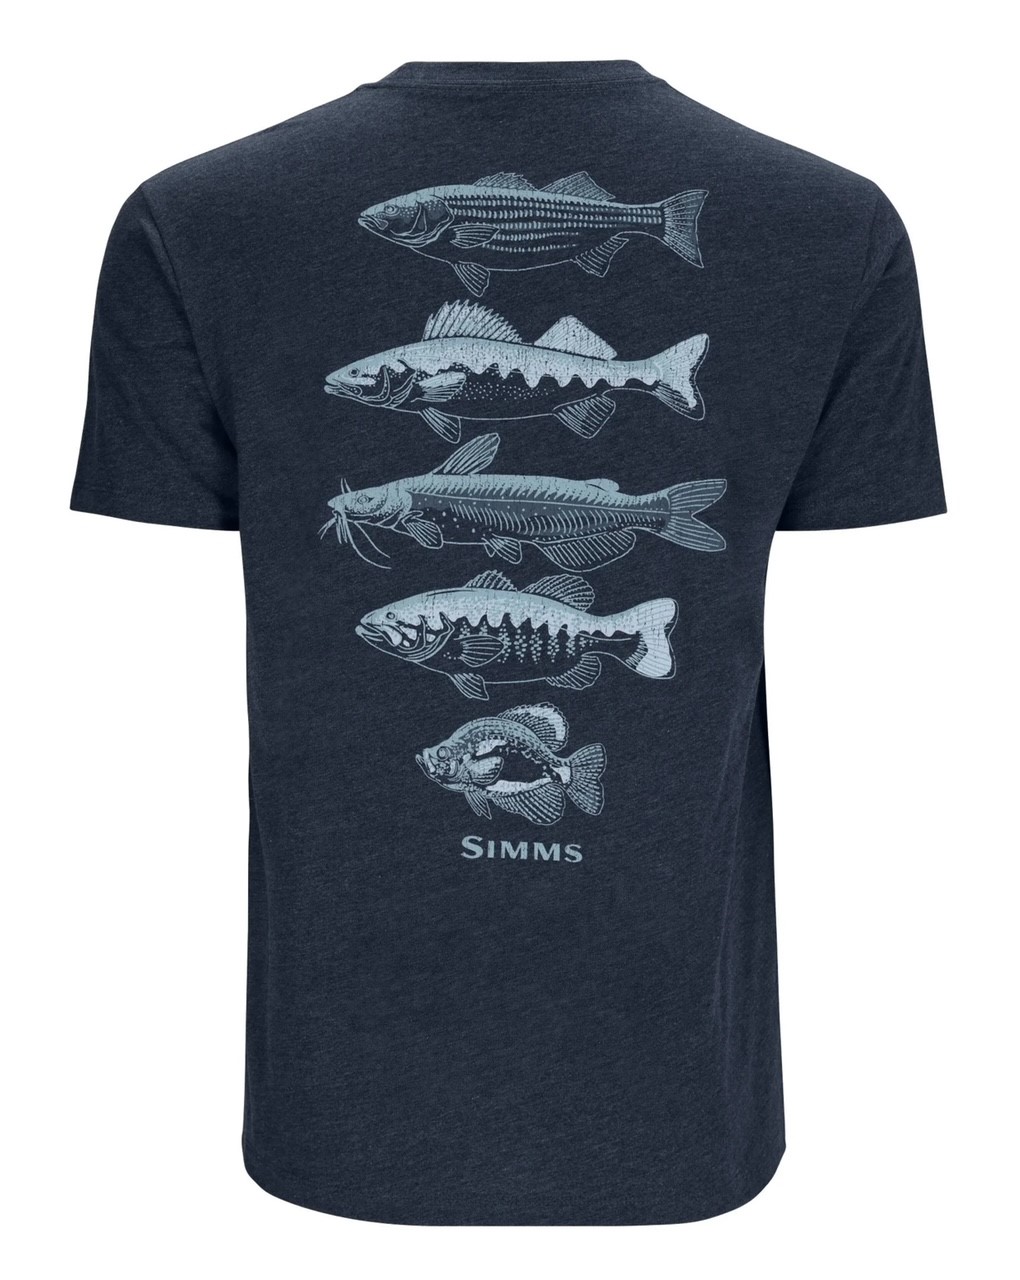 Simms M's Species T-Shirt - Navy Heather - Large